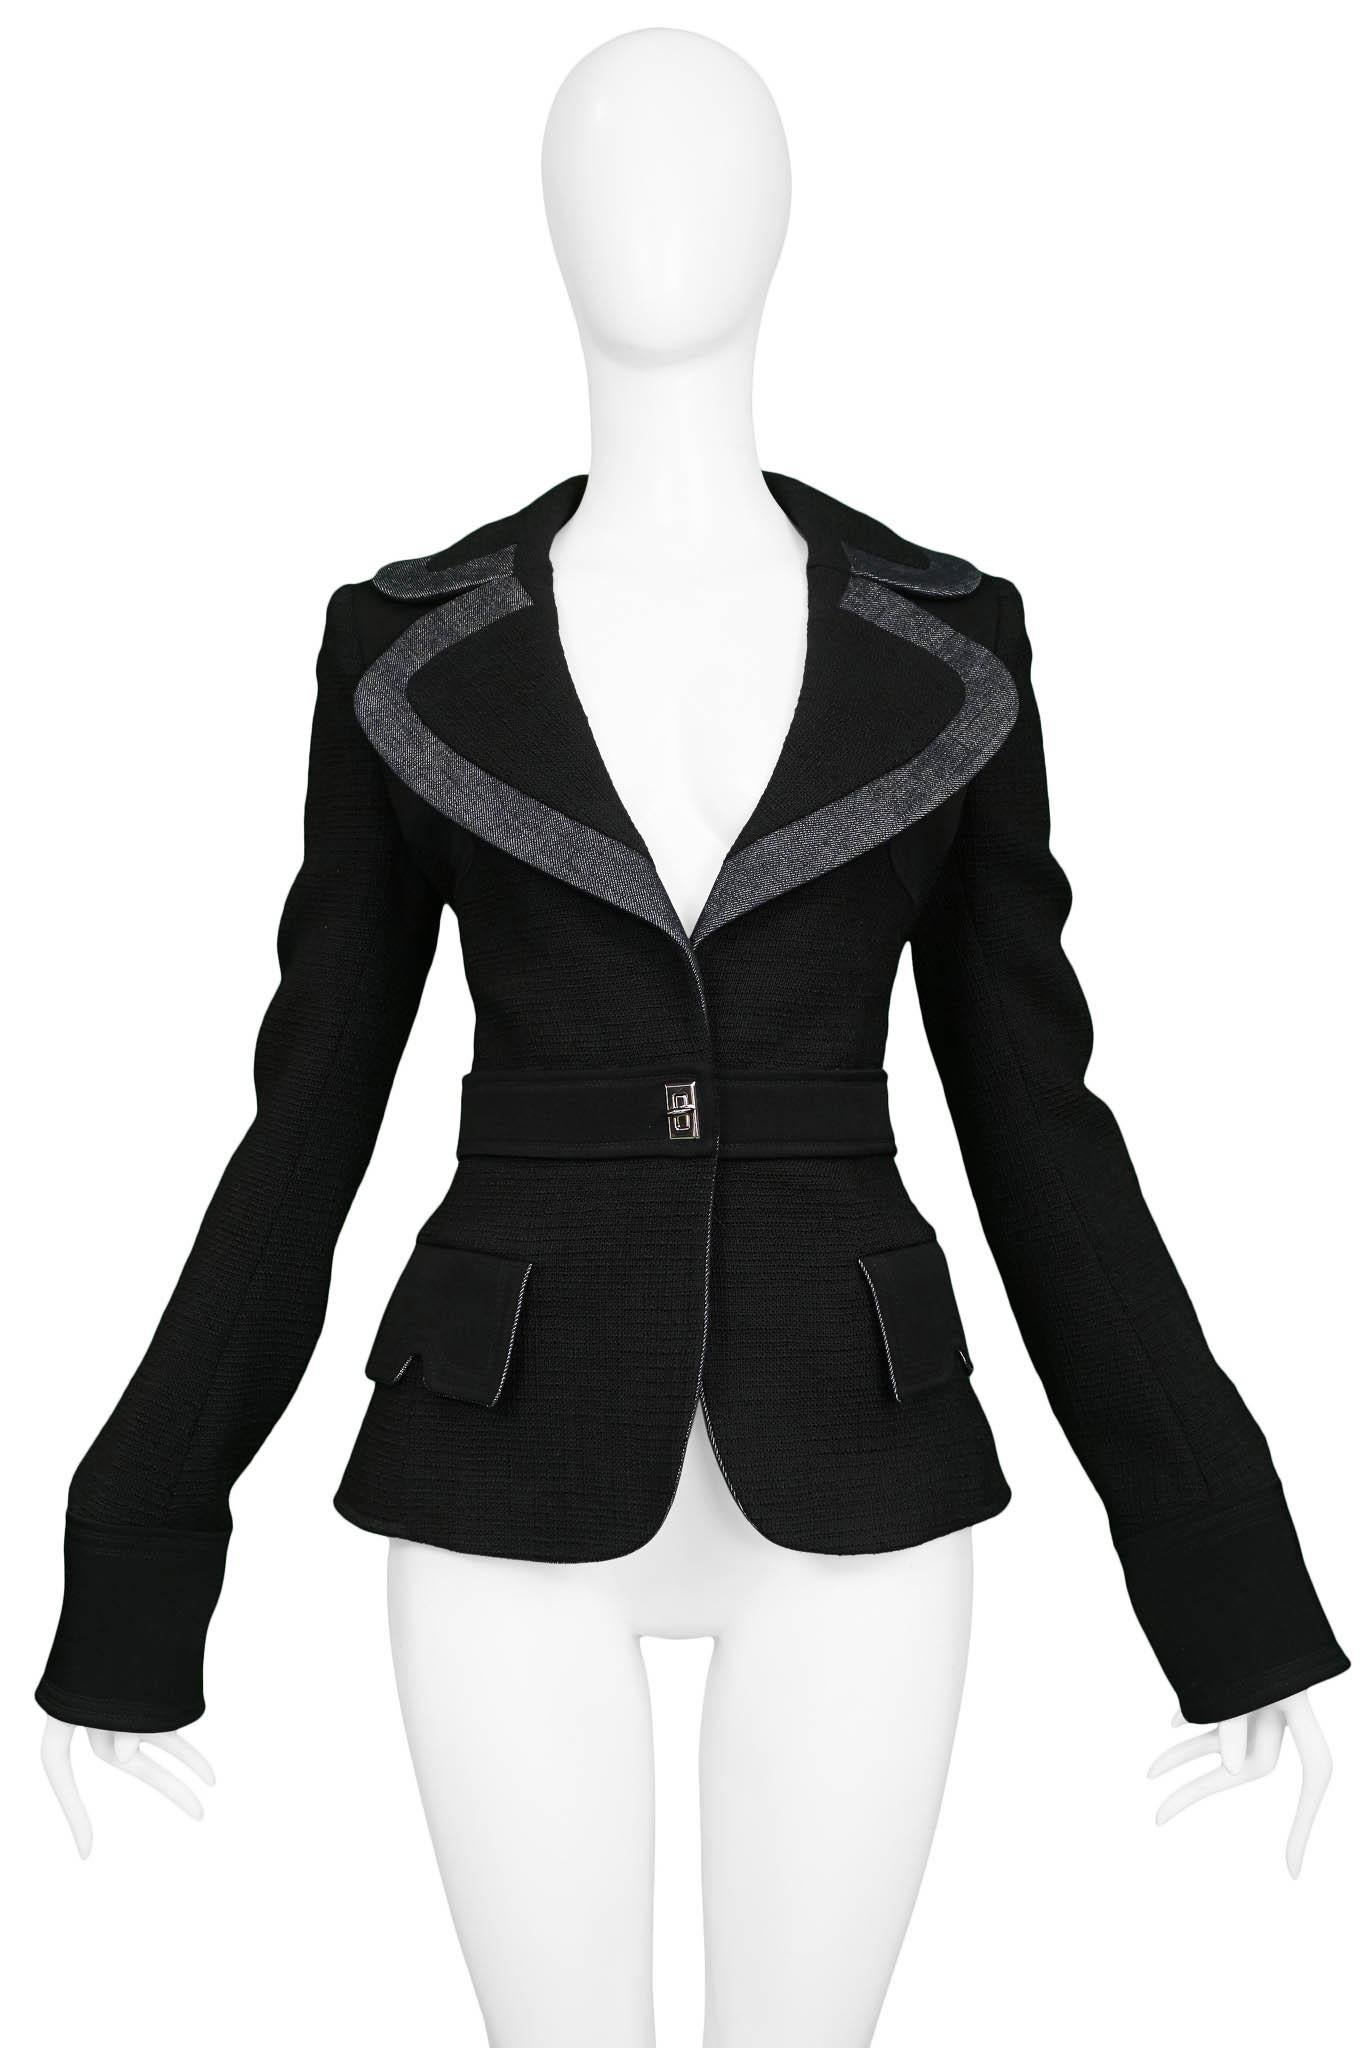 Resurrection Vintage is excited to offer of vintage Balenciaga by Nicolas Ghesquière black fitted blazer jacket featuring an extra-wide and round lapels and collar, an attached belt with silver hardware clasp, side pocket flaps, skinny extra long